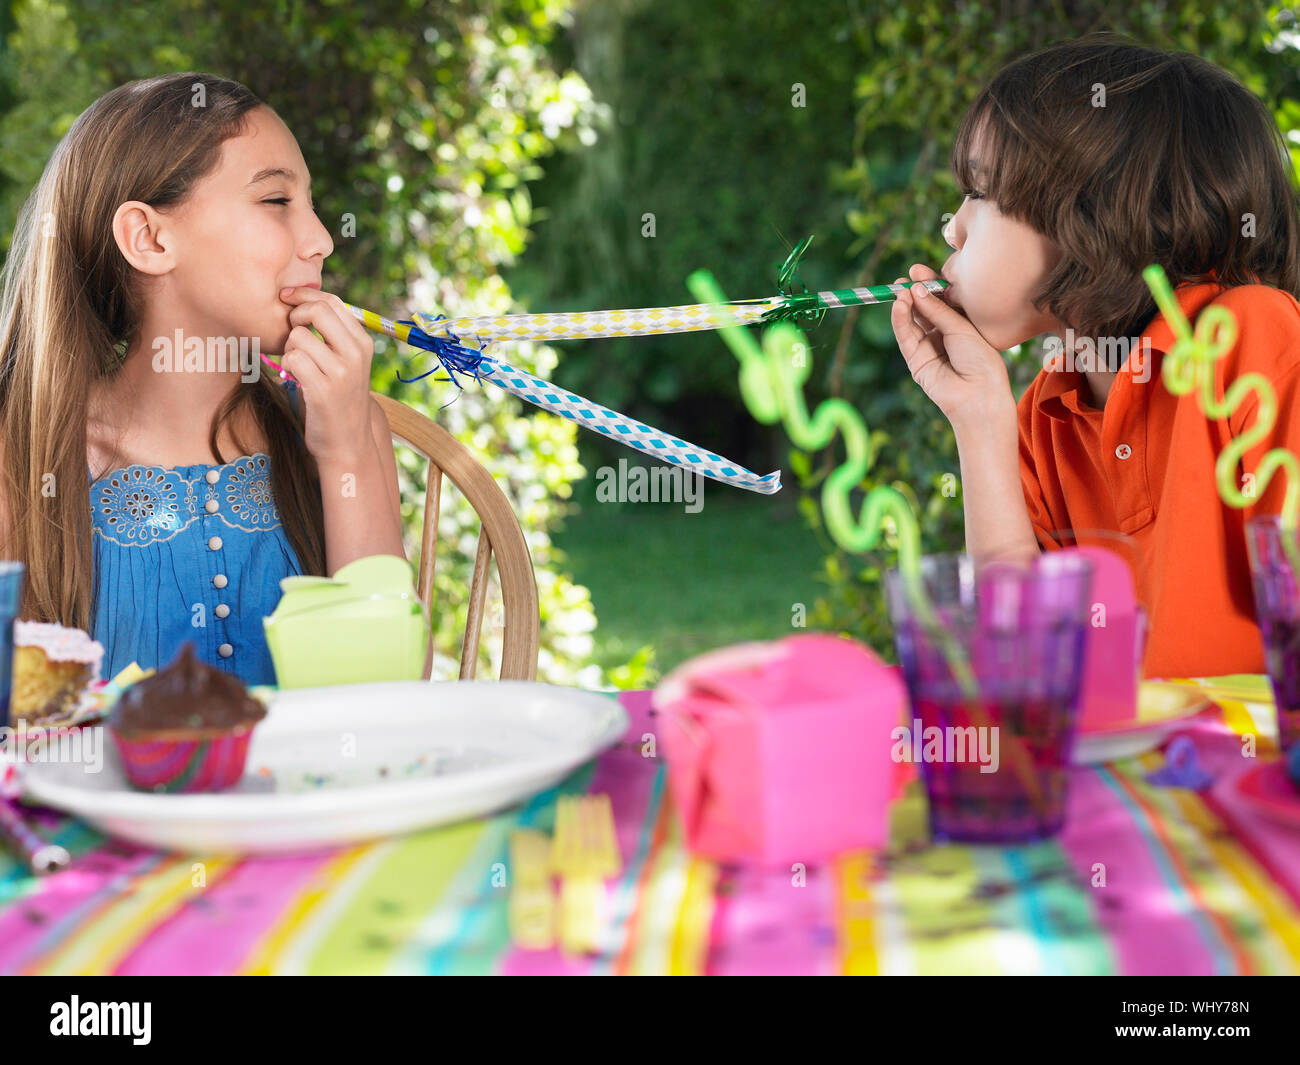 Young boy and girl blowing party puffers at each other in outdoor birthday party Stock Photo